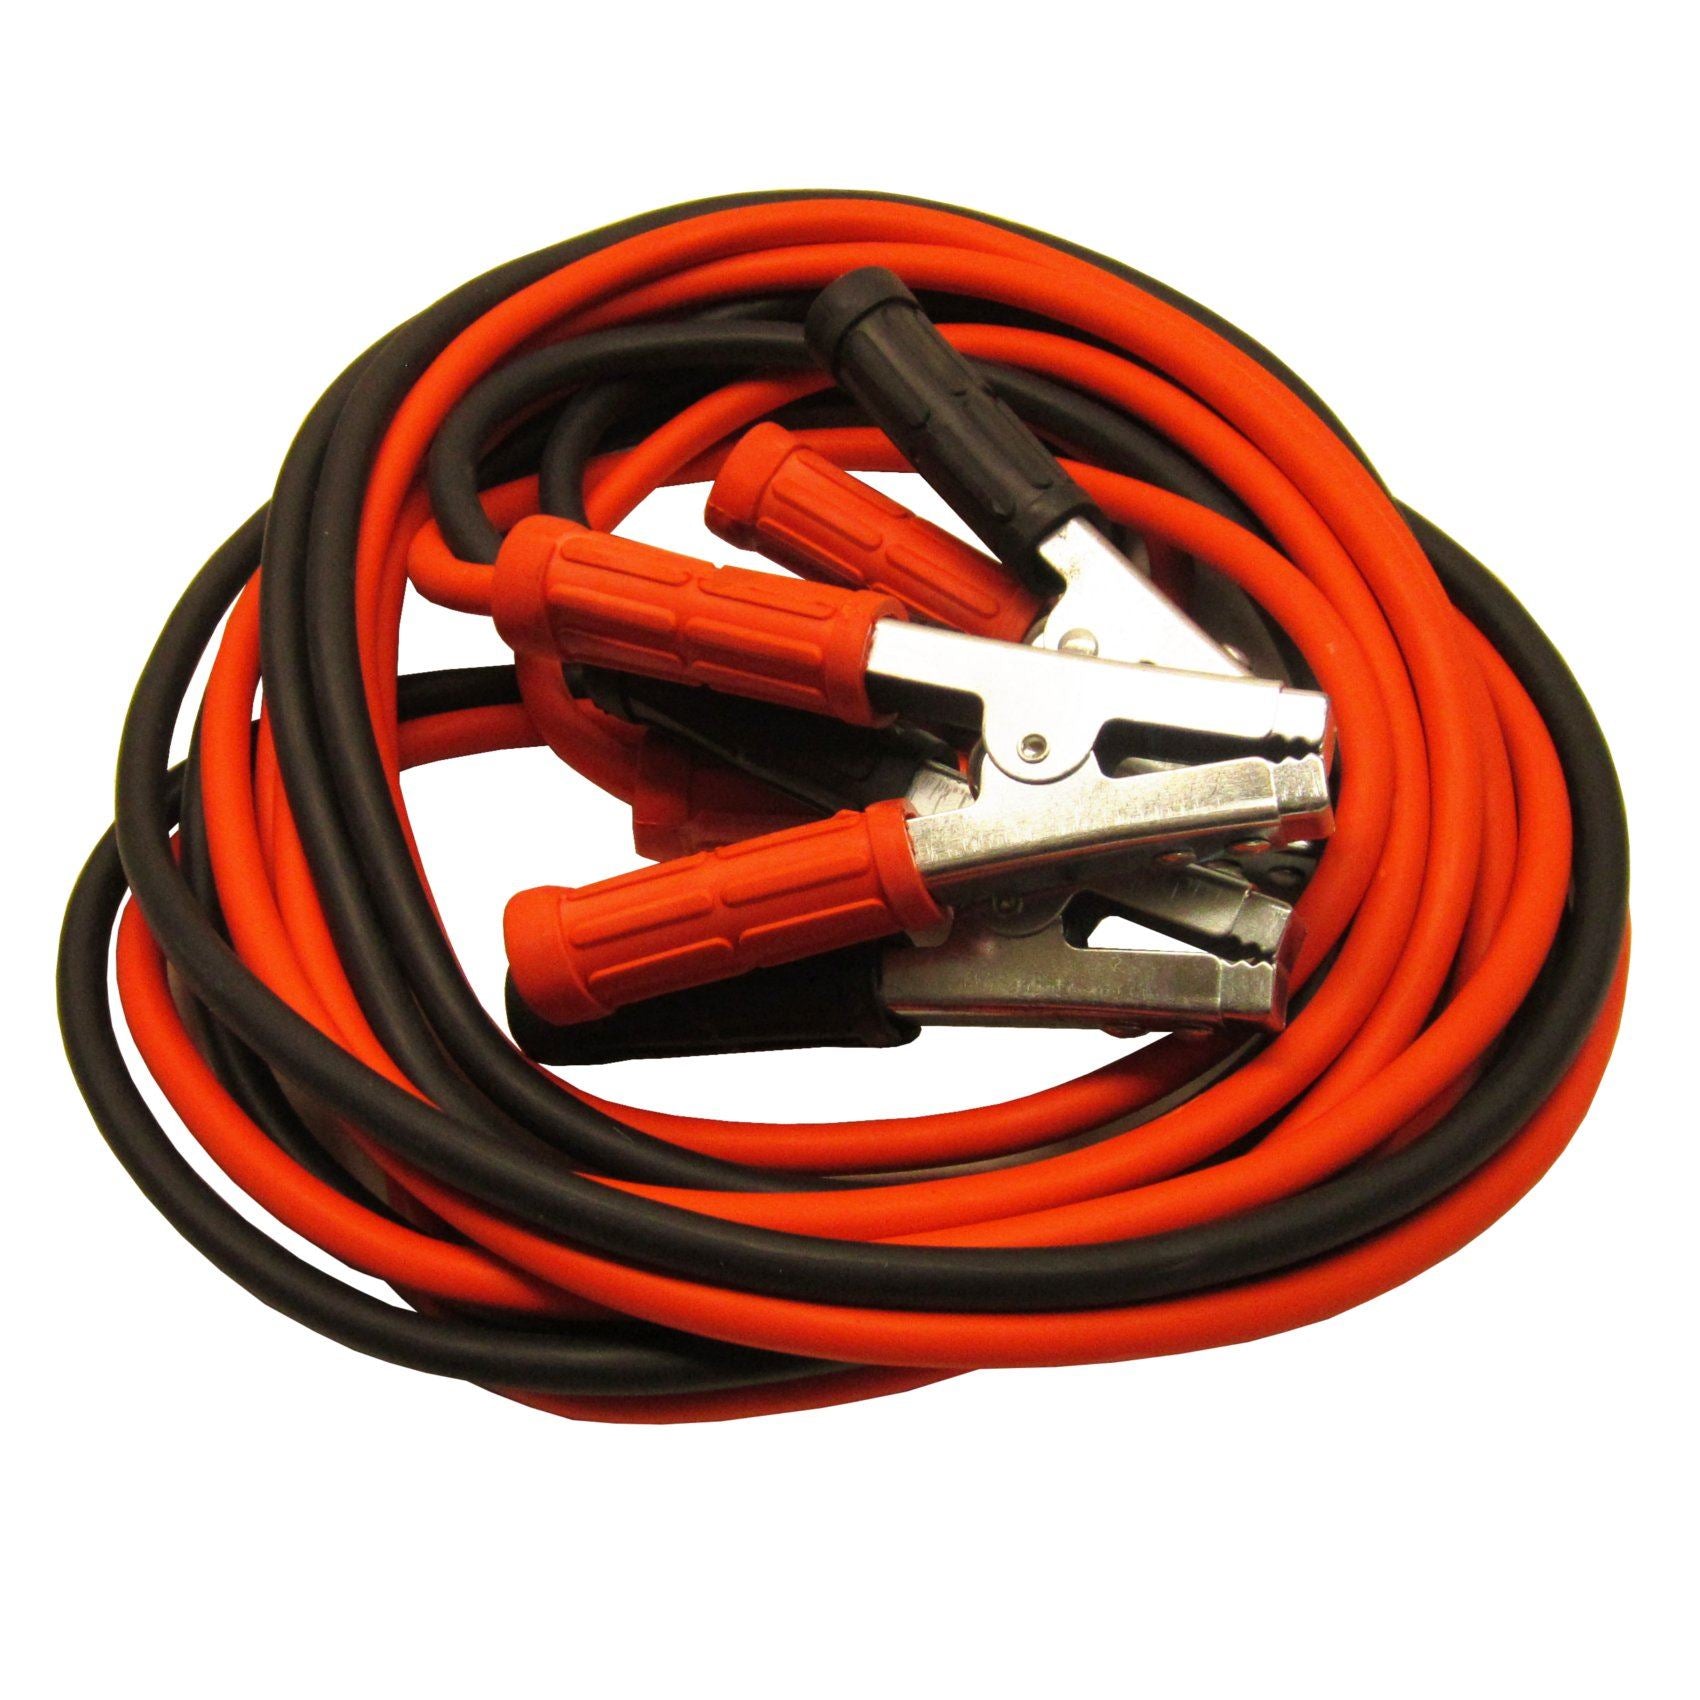 800 Amp Heavy Duty Jump Leads Booster Cable Cables HGV Cars Vans 6 Metres